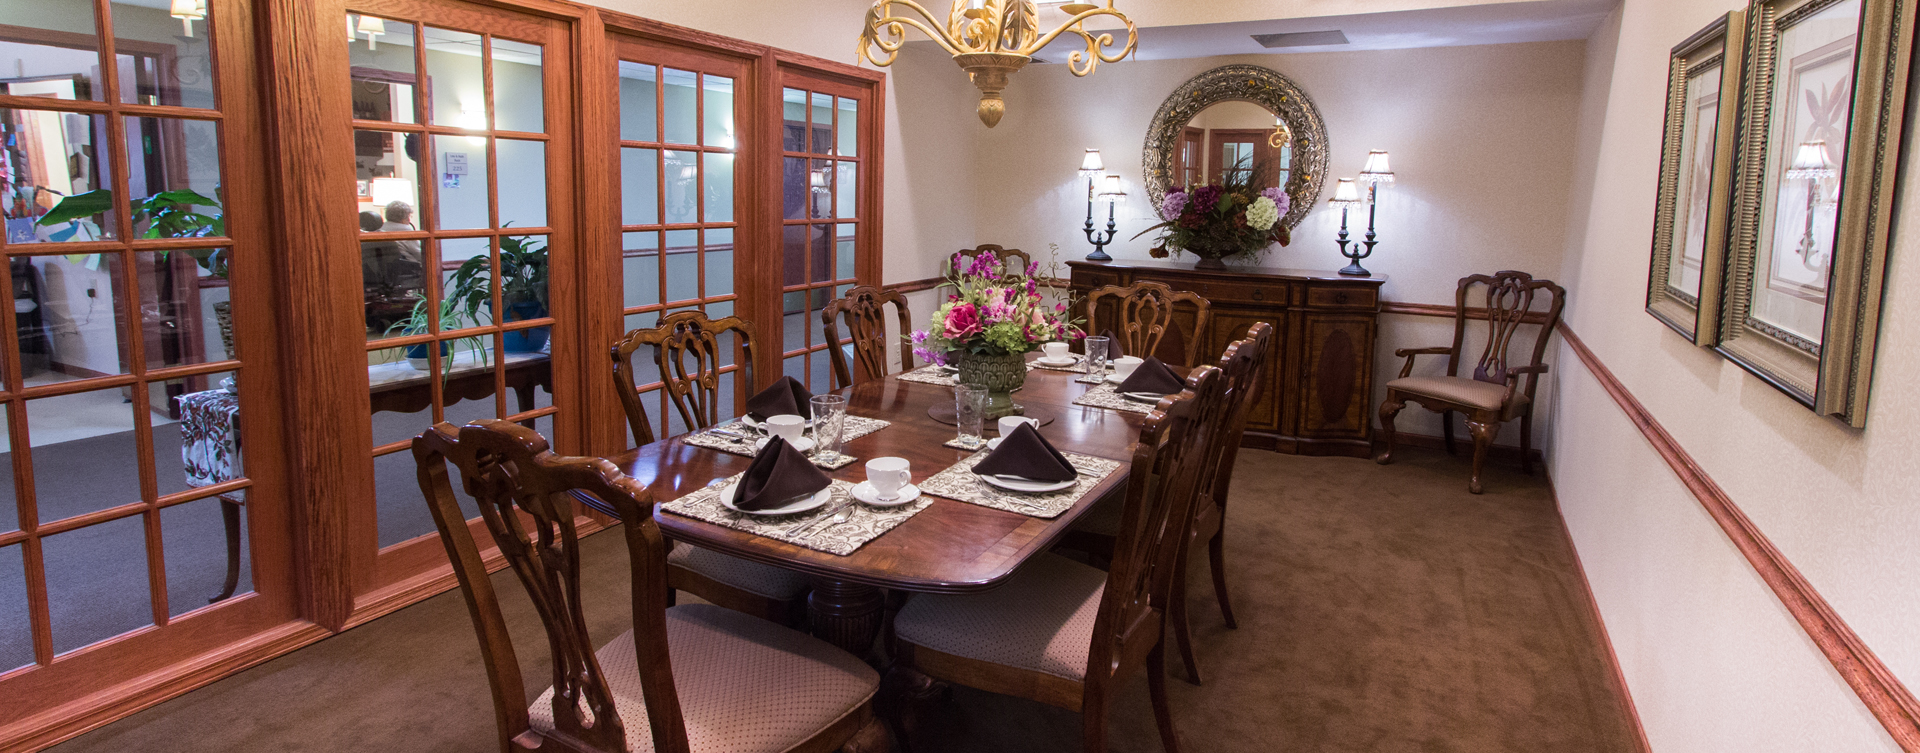 Celebrate special occasions in the private dining room at Bickford of Bourbonnais